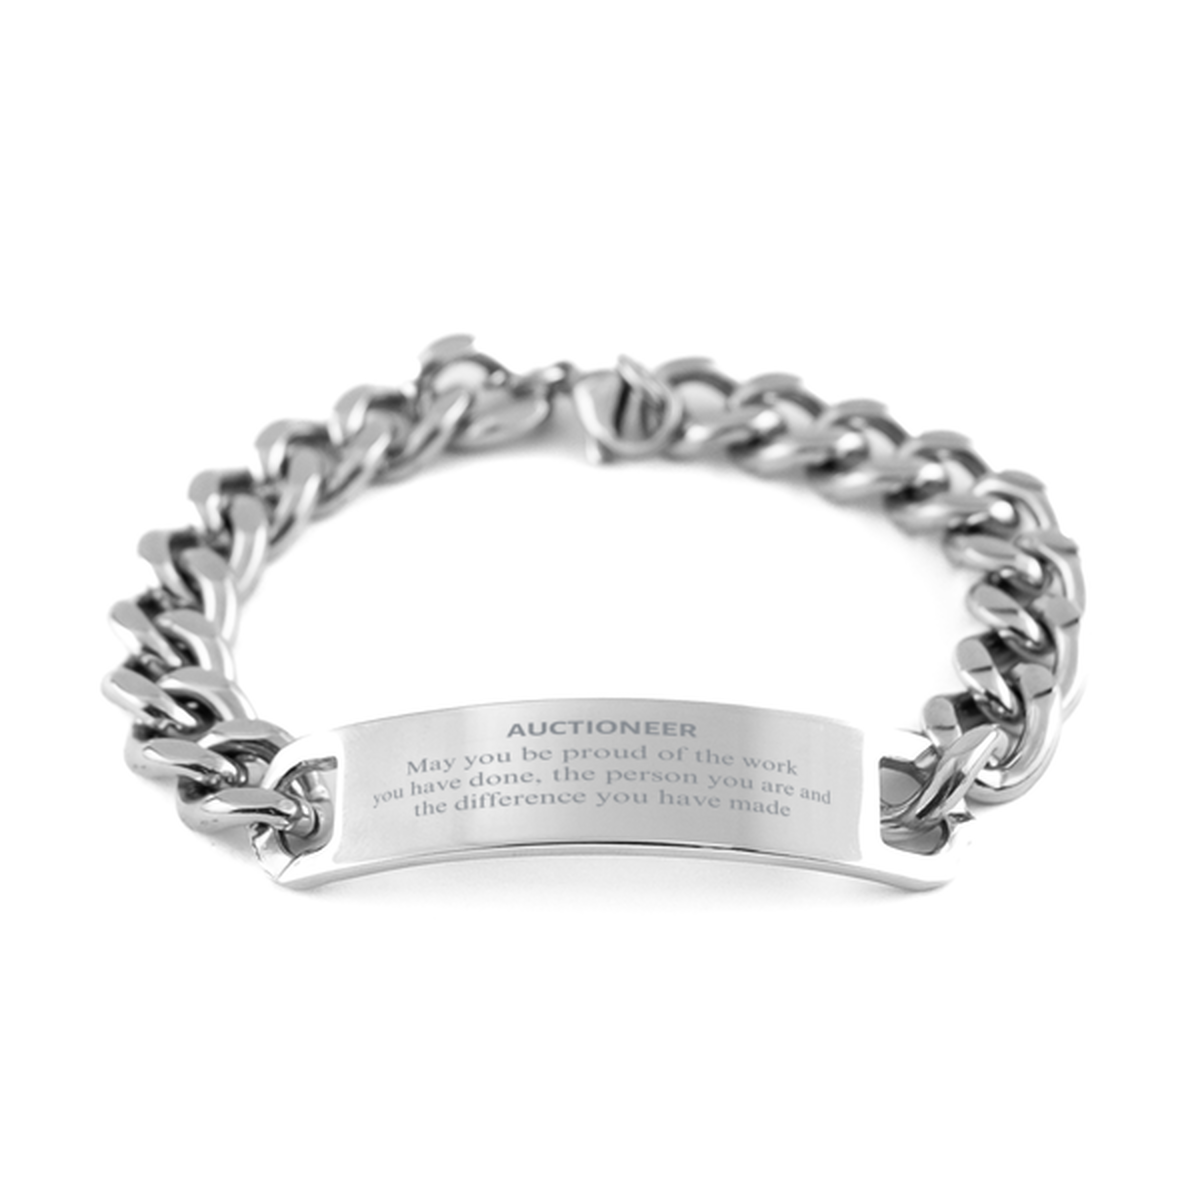 Auctioneer May you be proud of the work you have done, Retirement Auctioneer Cuban Chain Stainless Steel Bracelet for Colleague Appreciation Gifts Amazing for Auctioneer